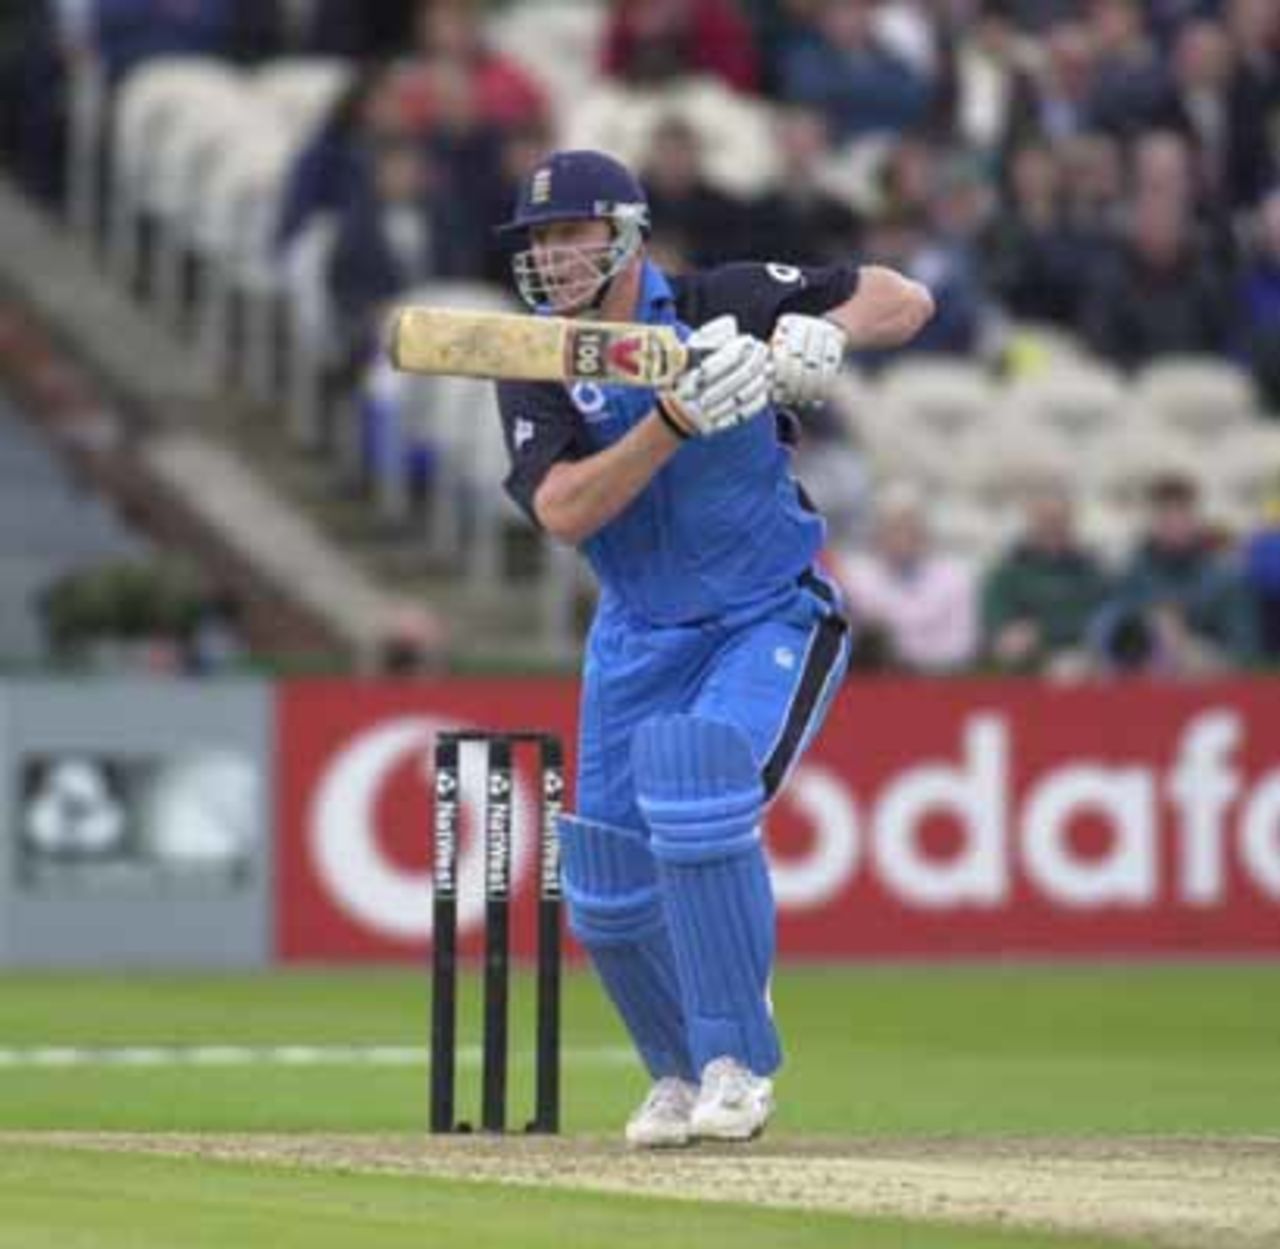 In the Nat West ODI series 2000; England v Zimbabwe, Manchester